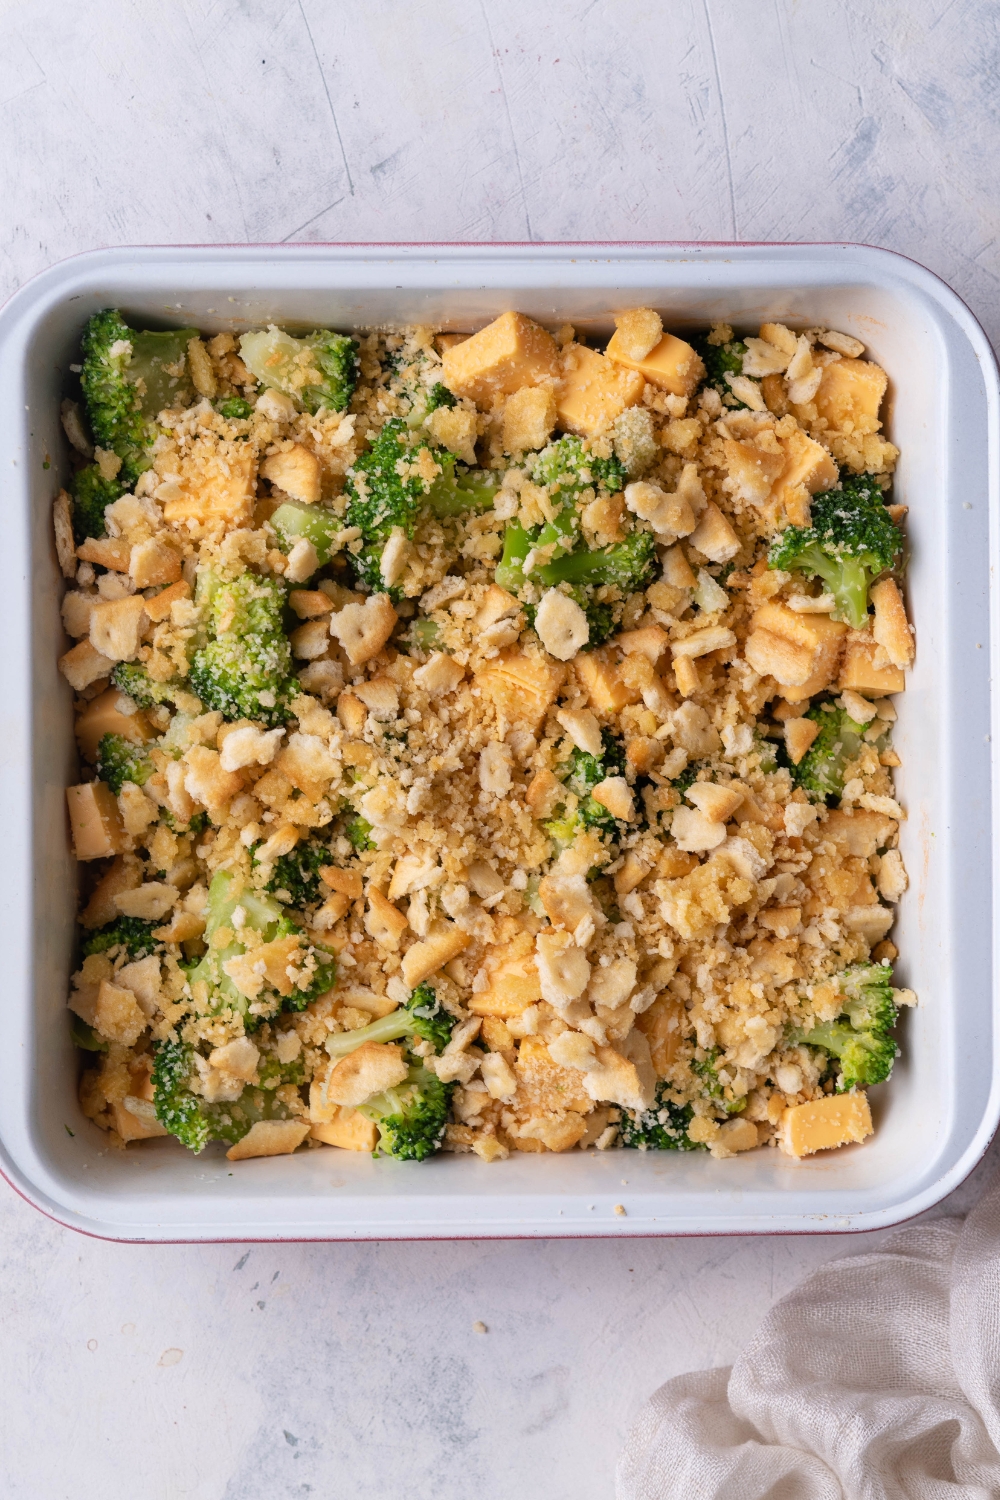 An overhead view of a casserole dish with broccoli, cubed cheese, and crumbled crackers.